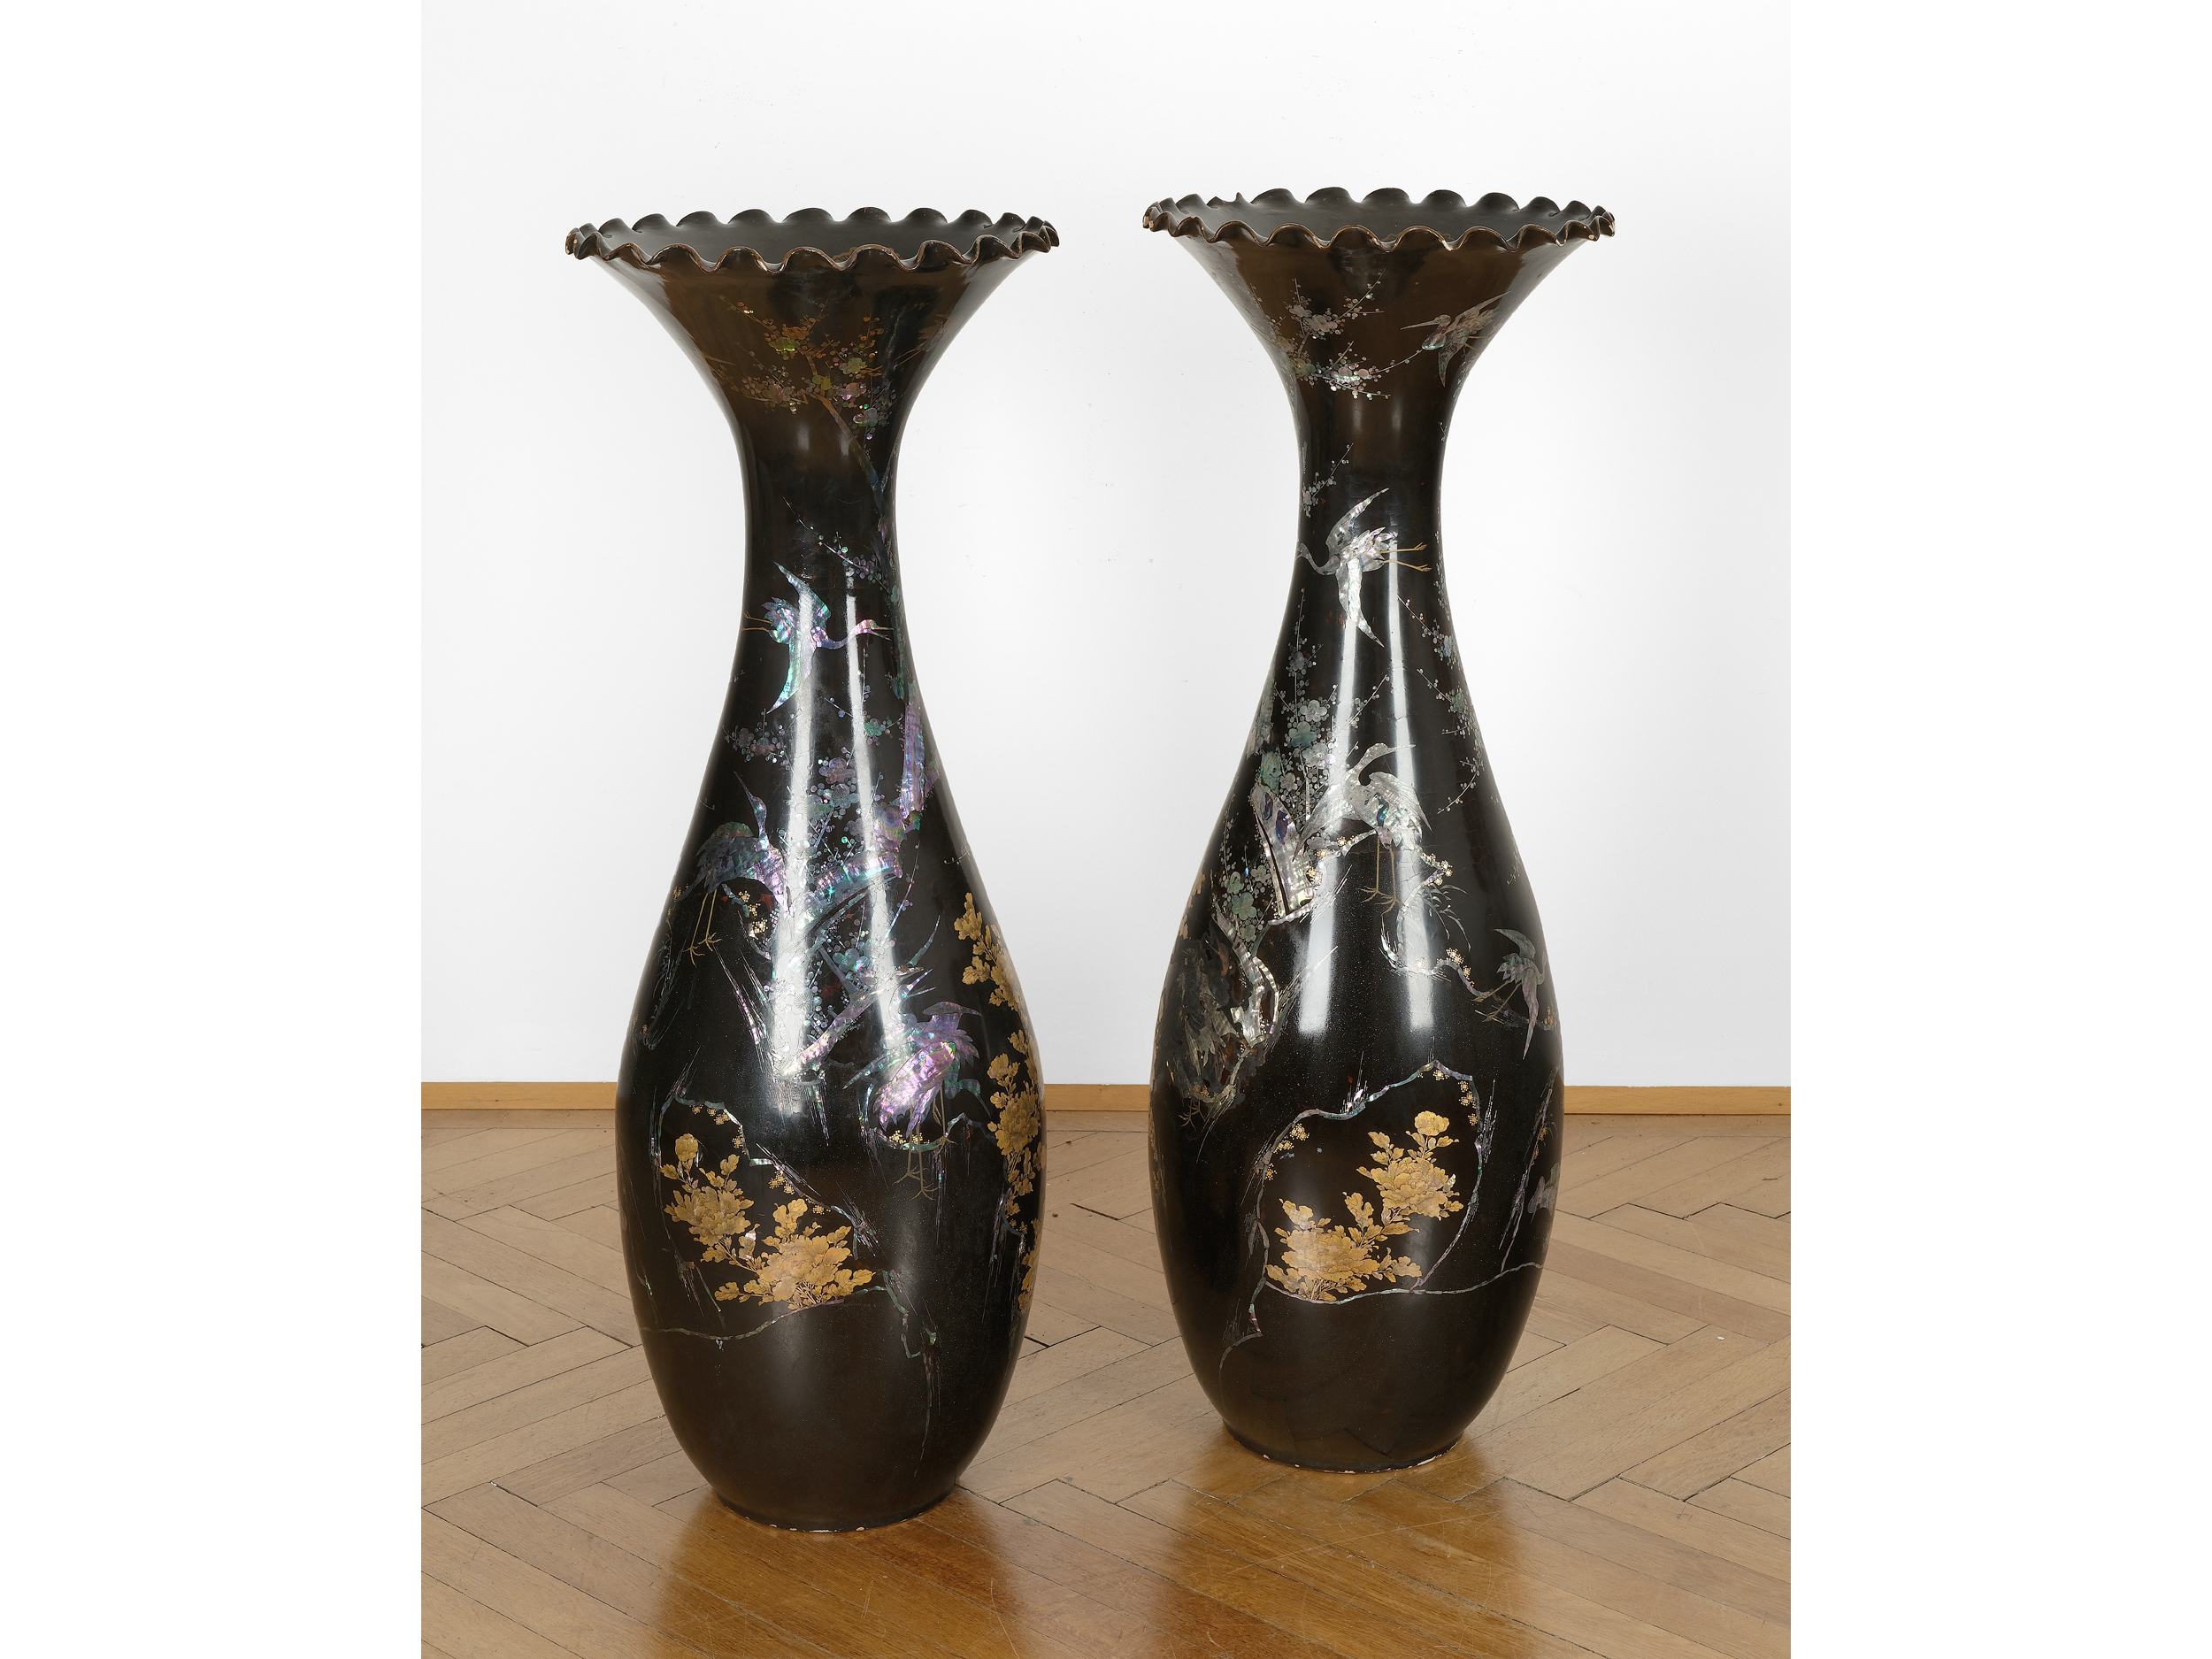 2 large vases, China/Japan?, Ceramic with mother-of-pearl inlays